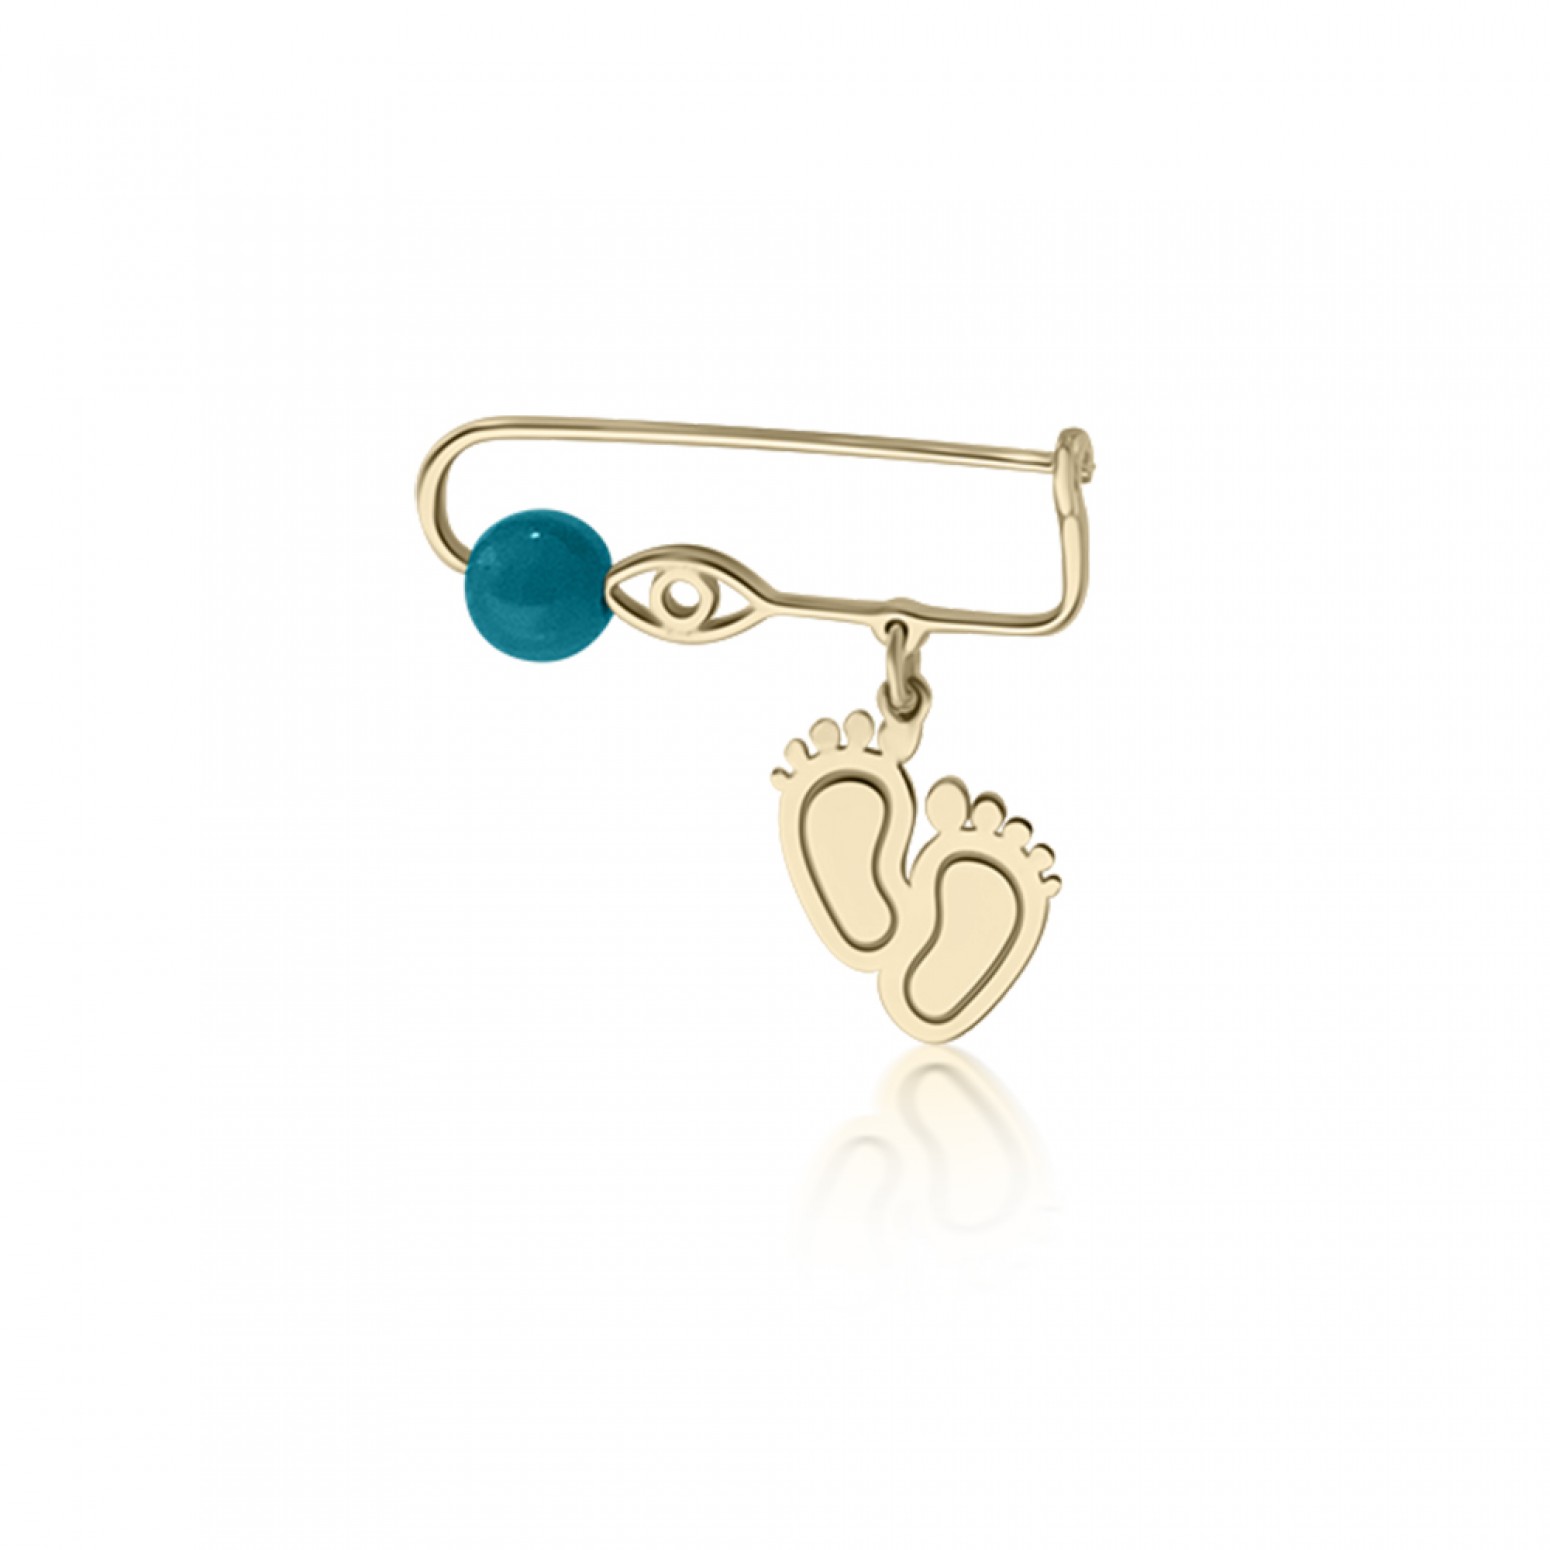 Babies pin K14 gold with paws, eye and turquoise pf0072 BABIES Κοσμηματα - chrilia.gr